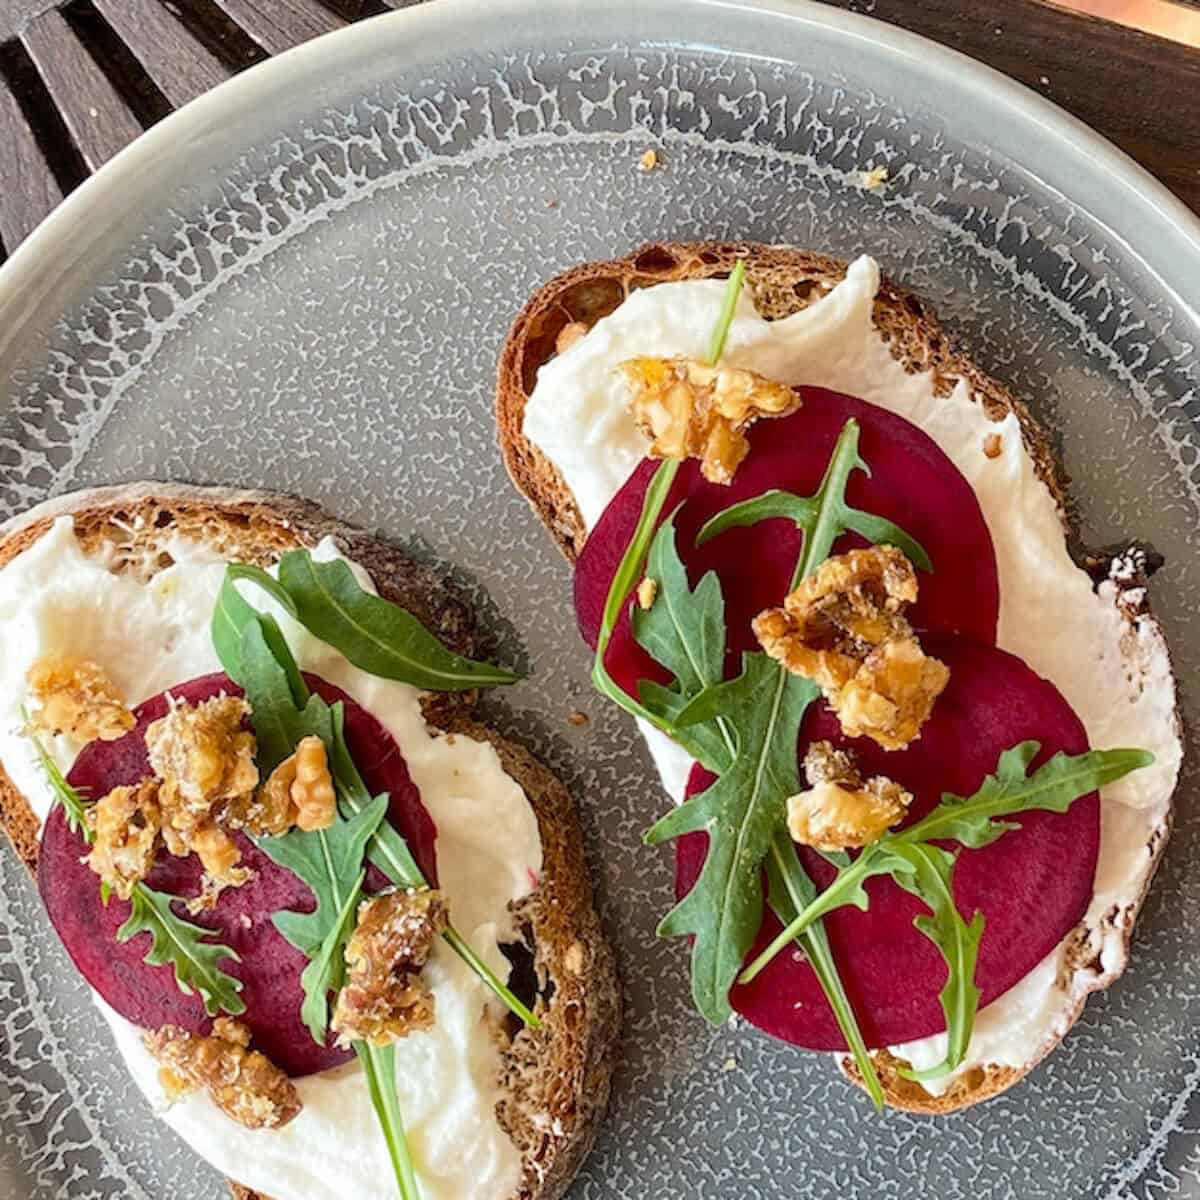 beetroot carpaccio and whipped goat cheese canape with caramelised walnuts